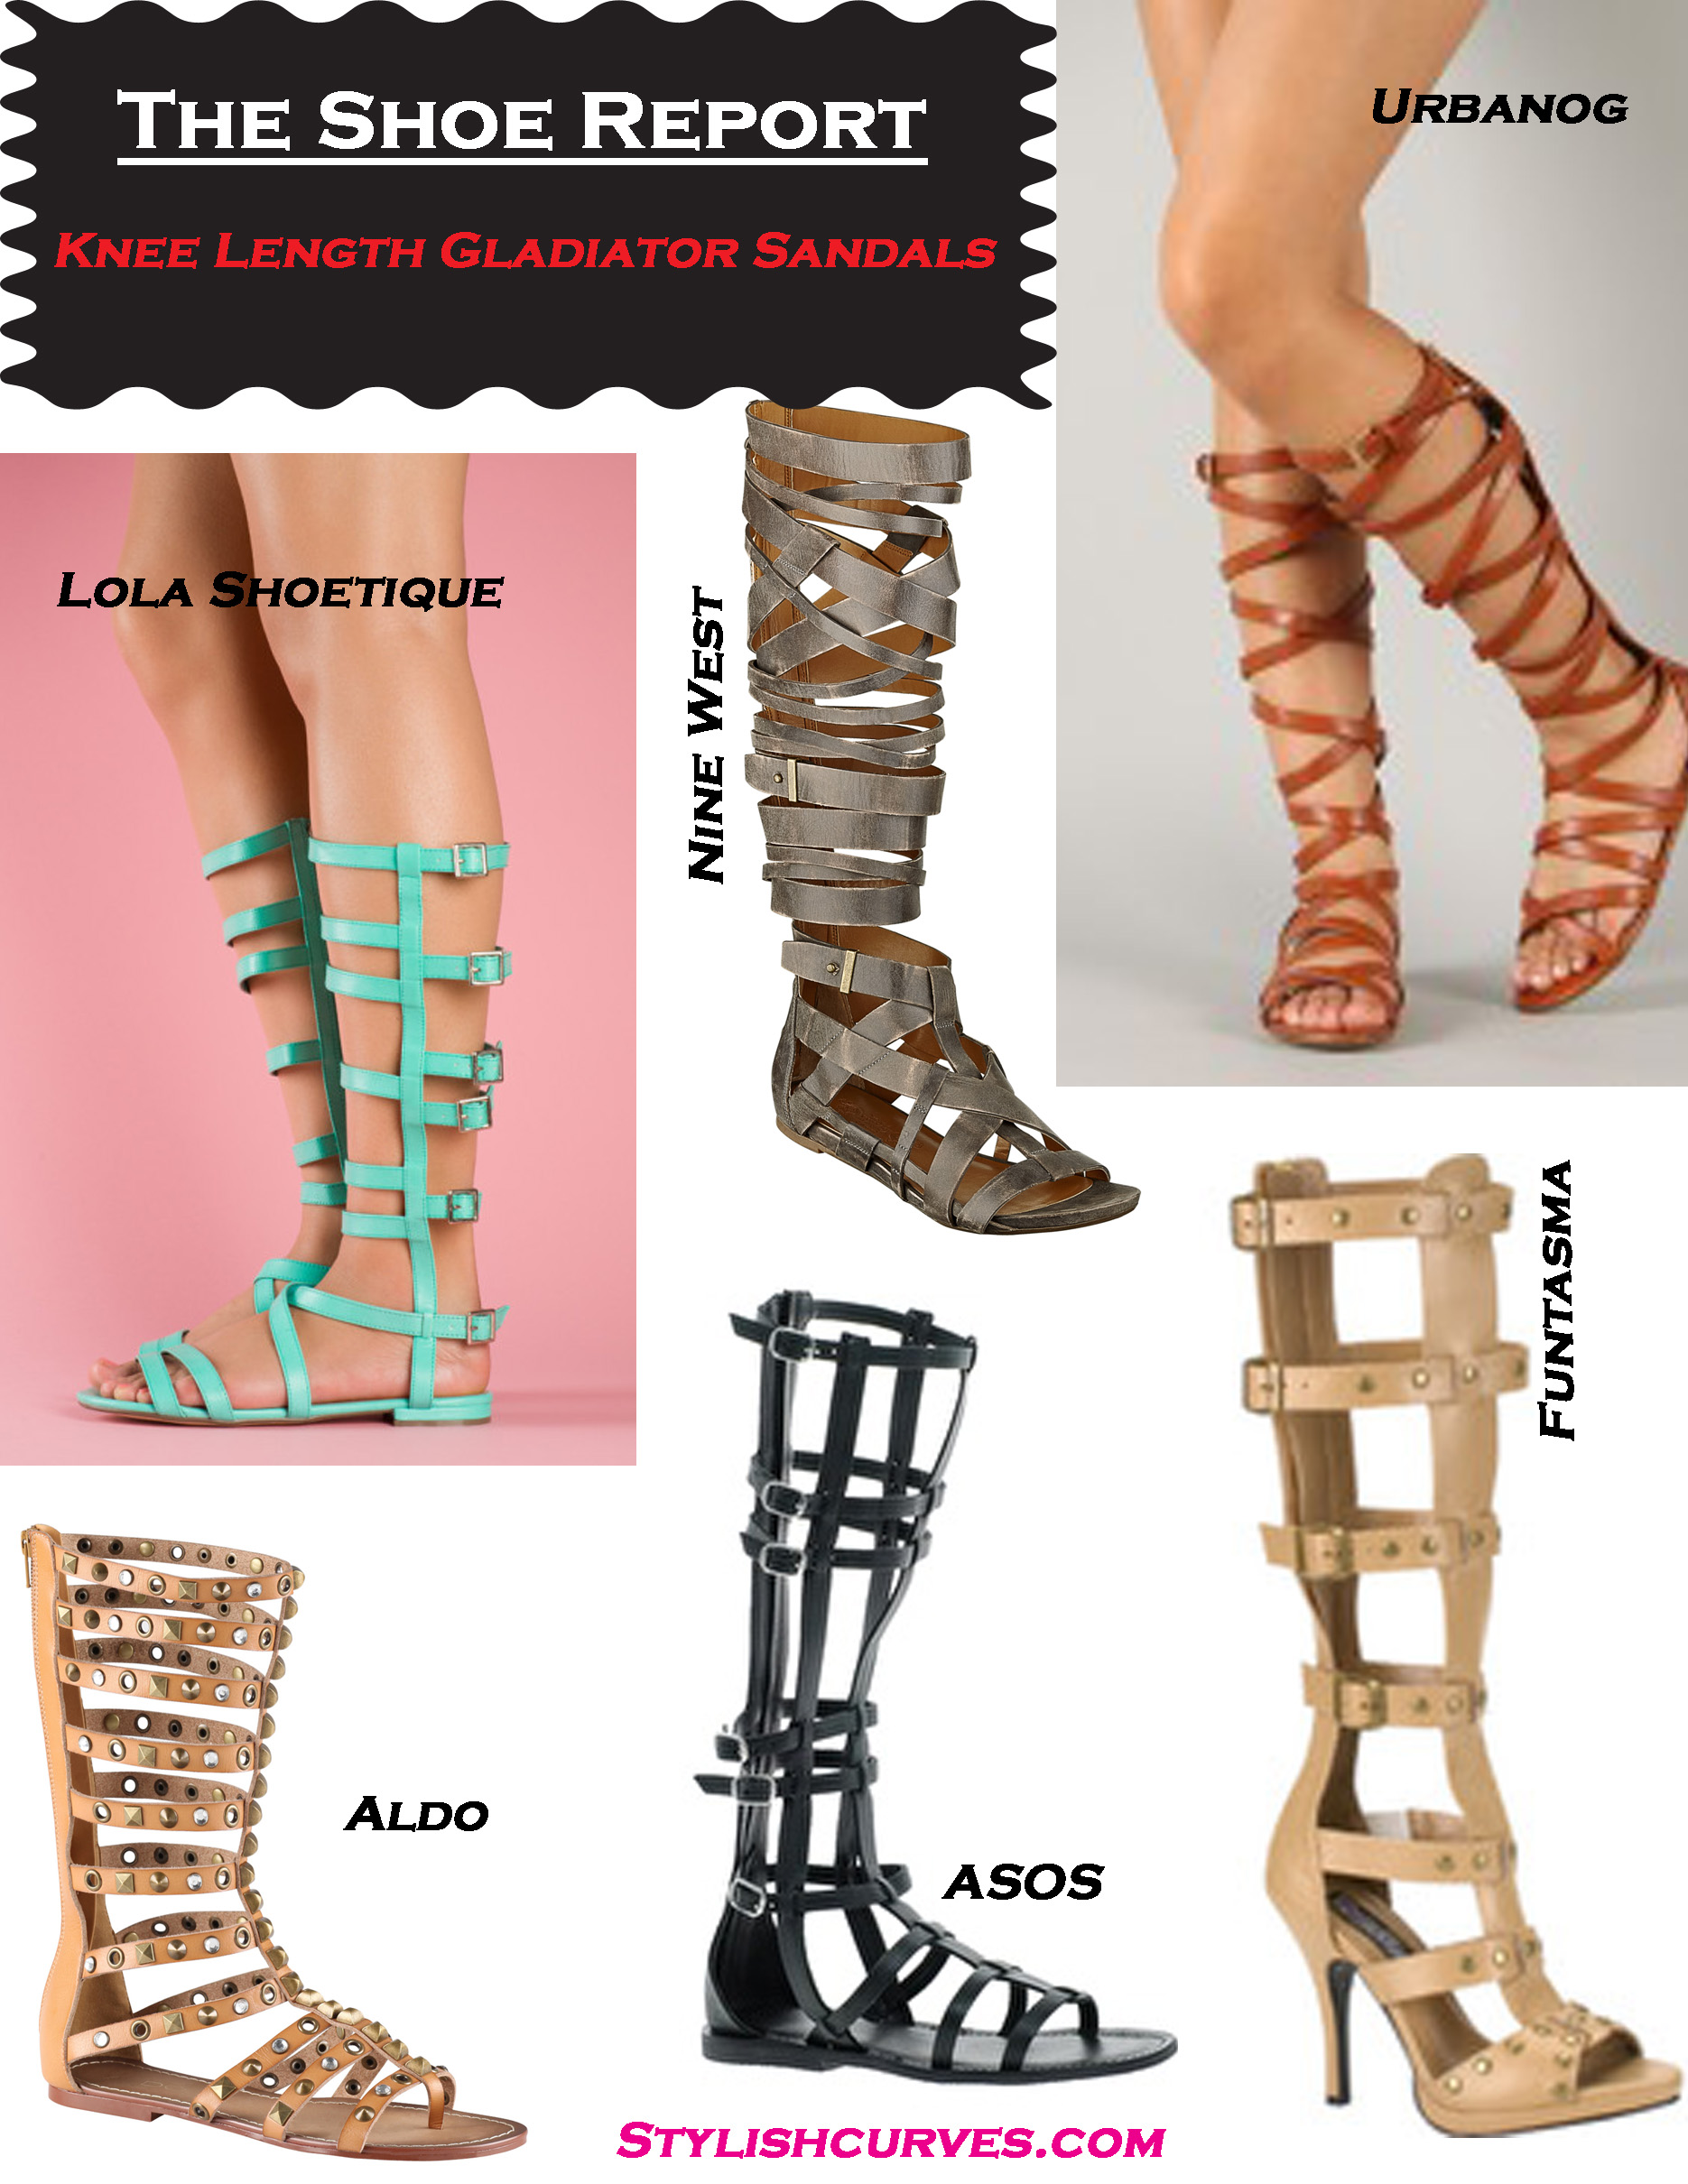 THE SHOE REPORT: KNEE LENGTH GLADIATOR SANDALS | Stylish Curves